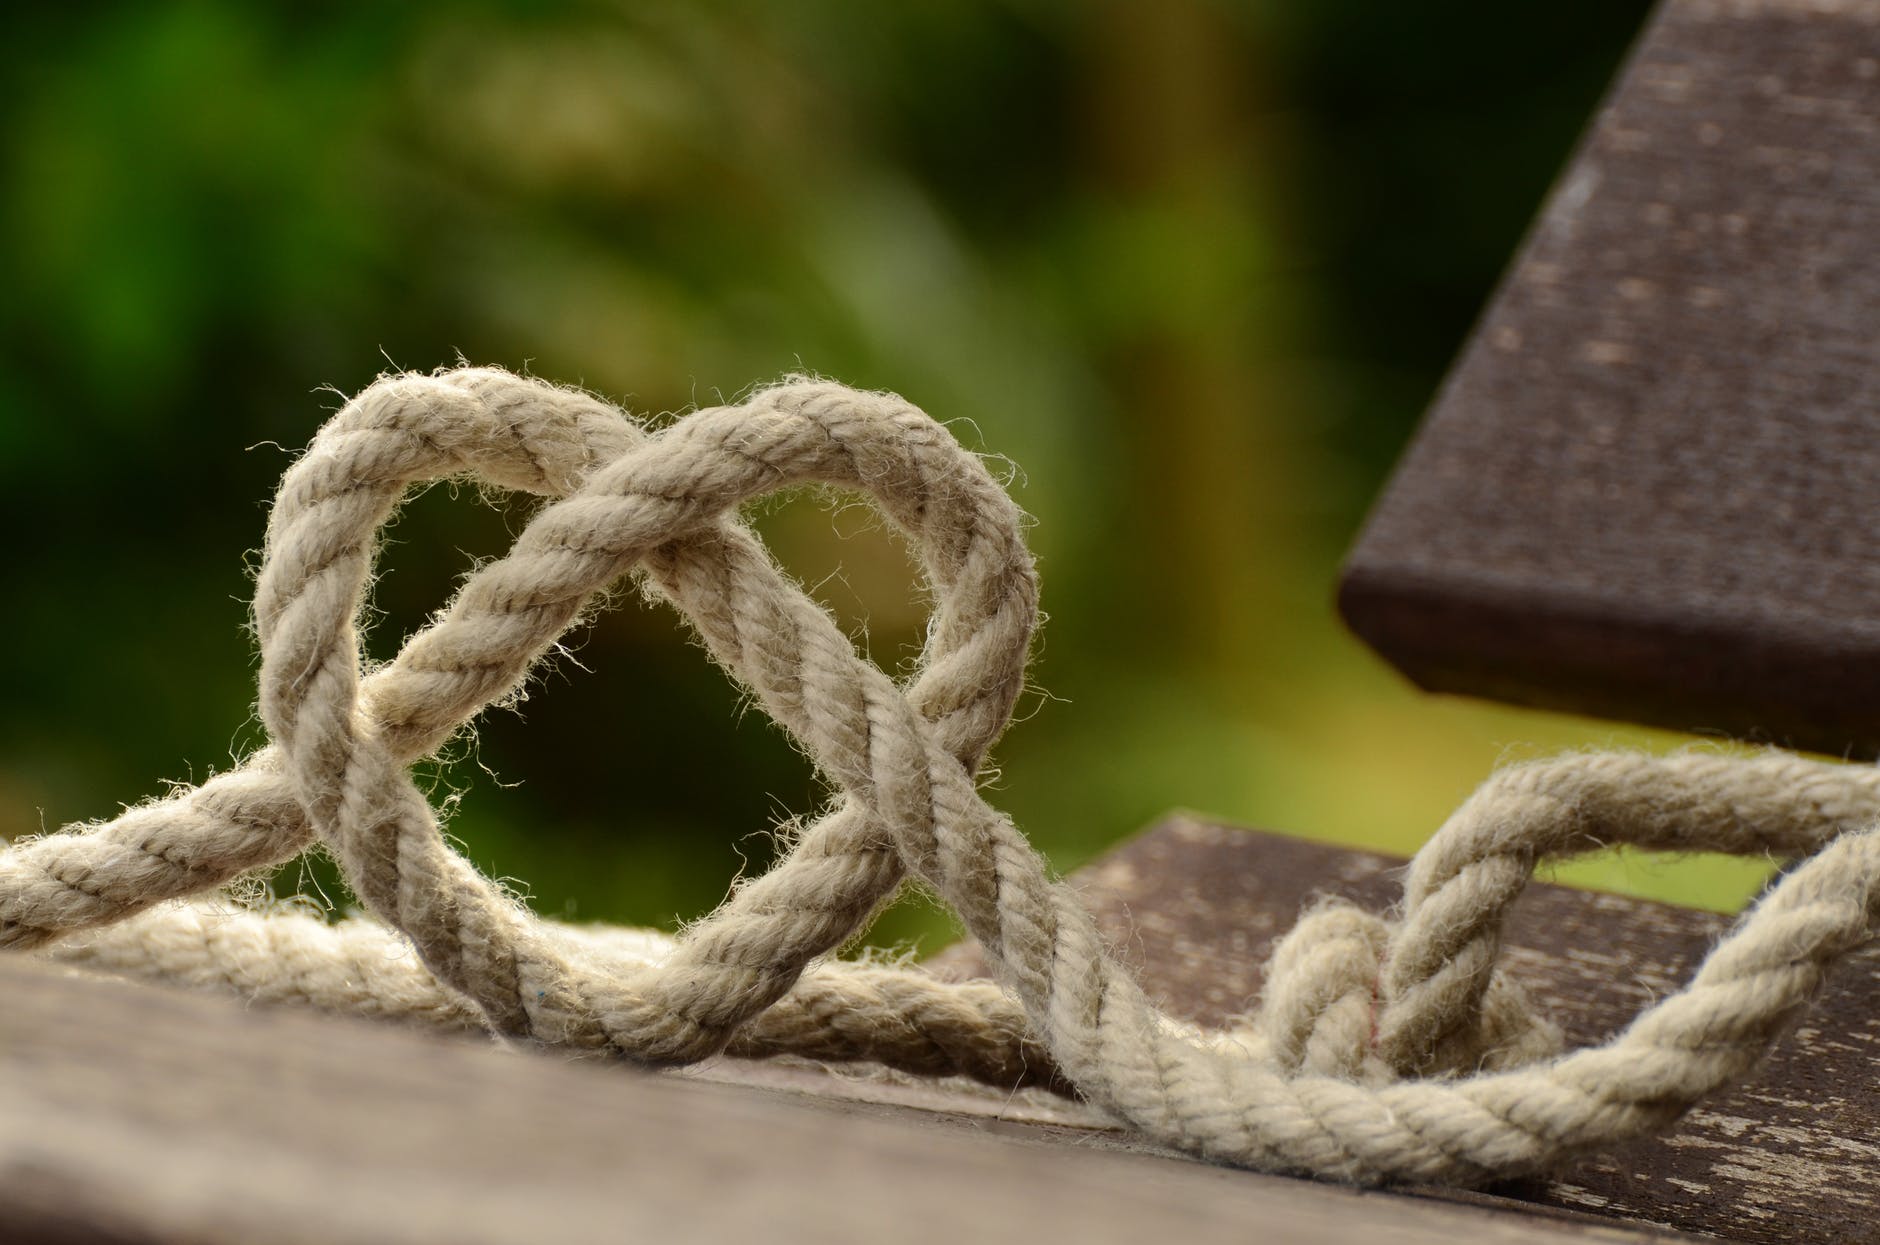 A rope tied into a heart shape